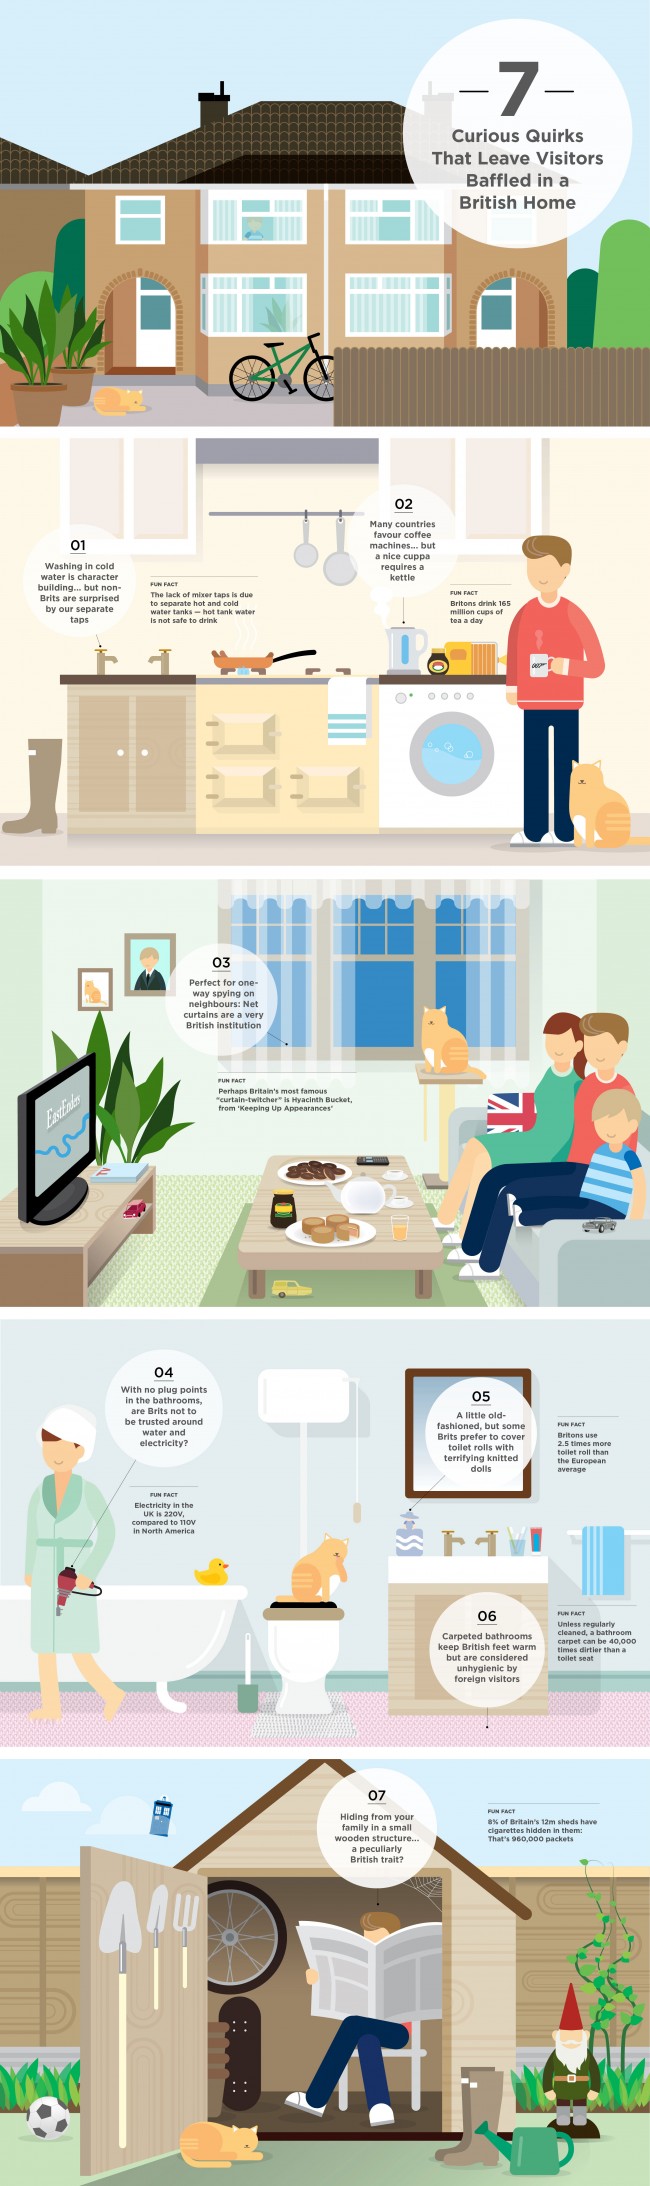 Infographic showing some of the quirks unique to British homes